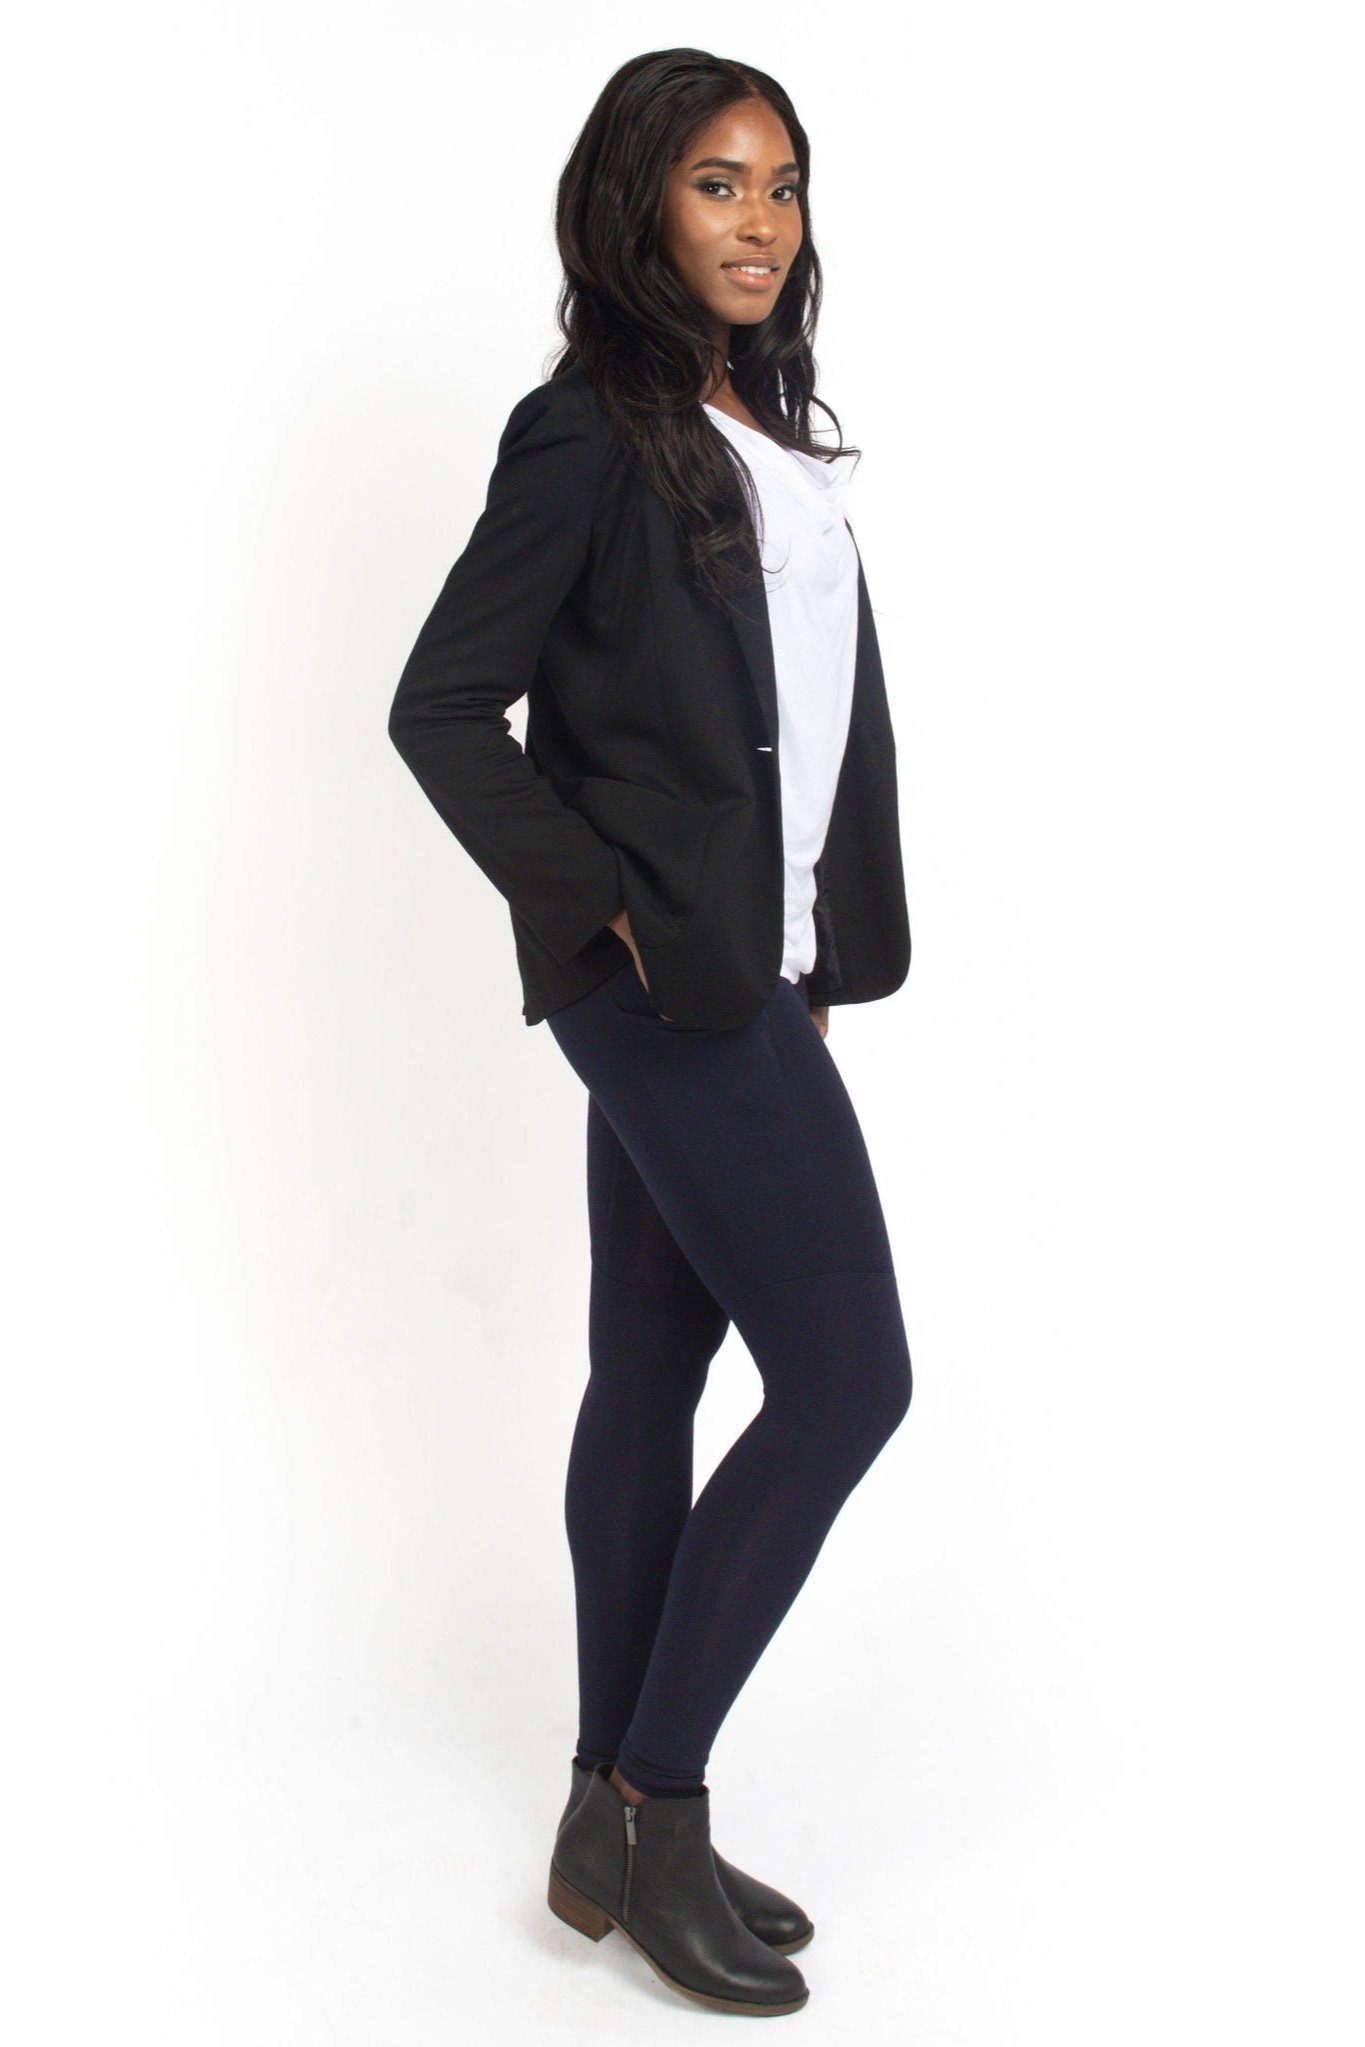 Are Leggings Under A Dress Business Casual? – solowomen